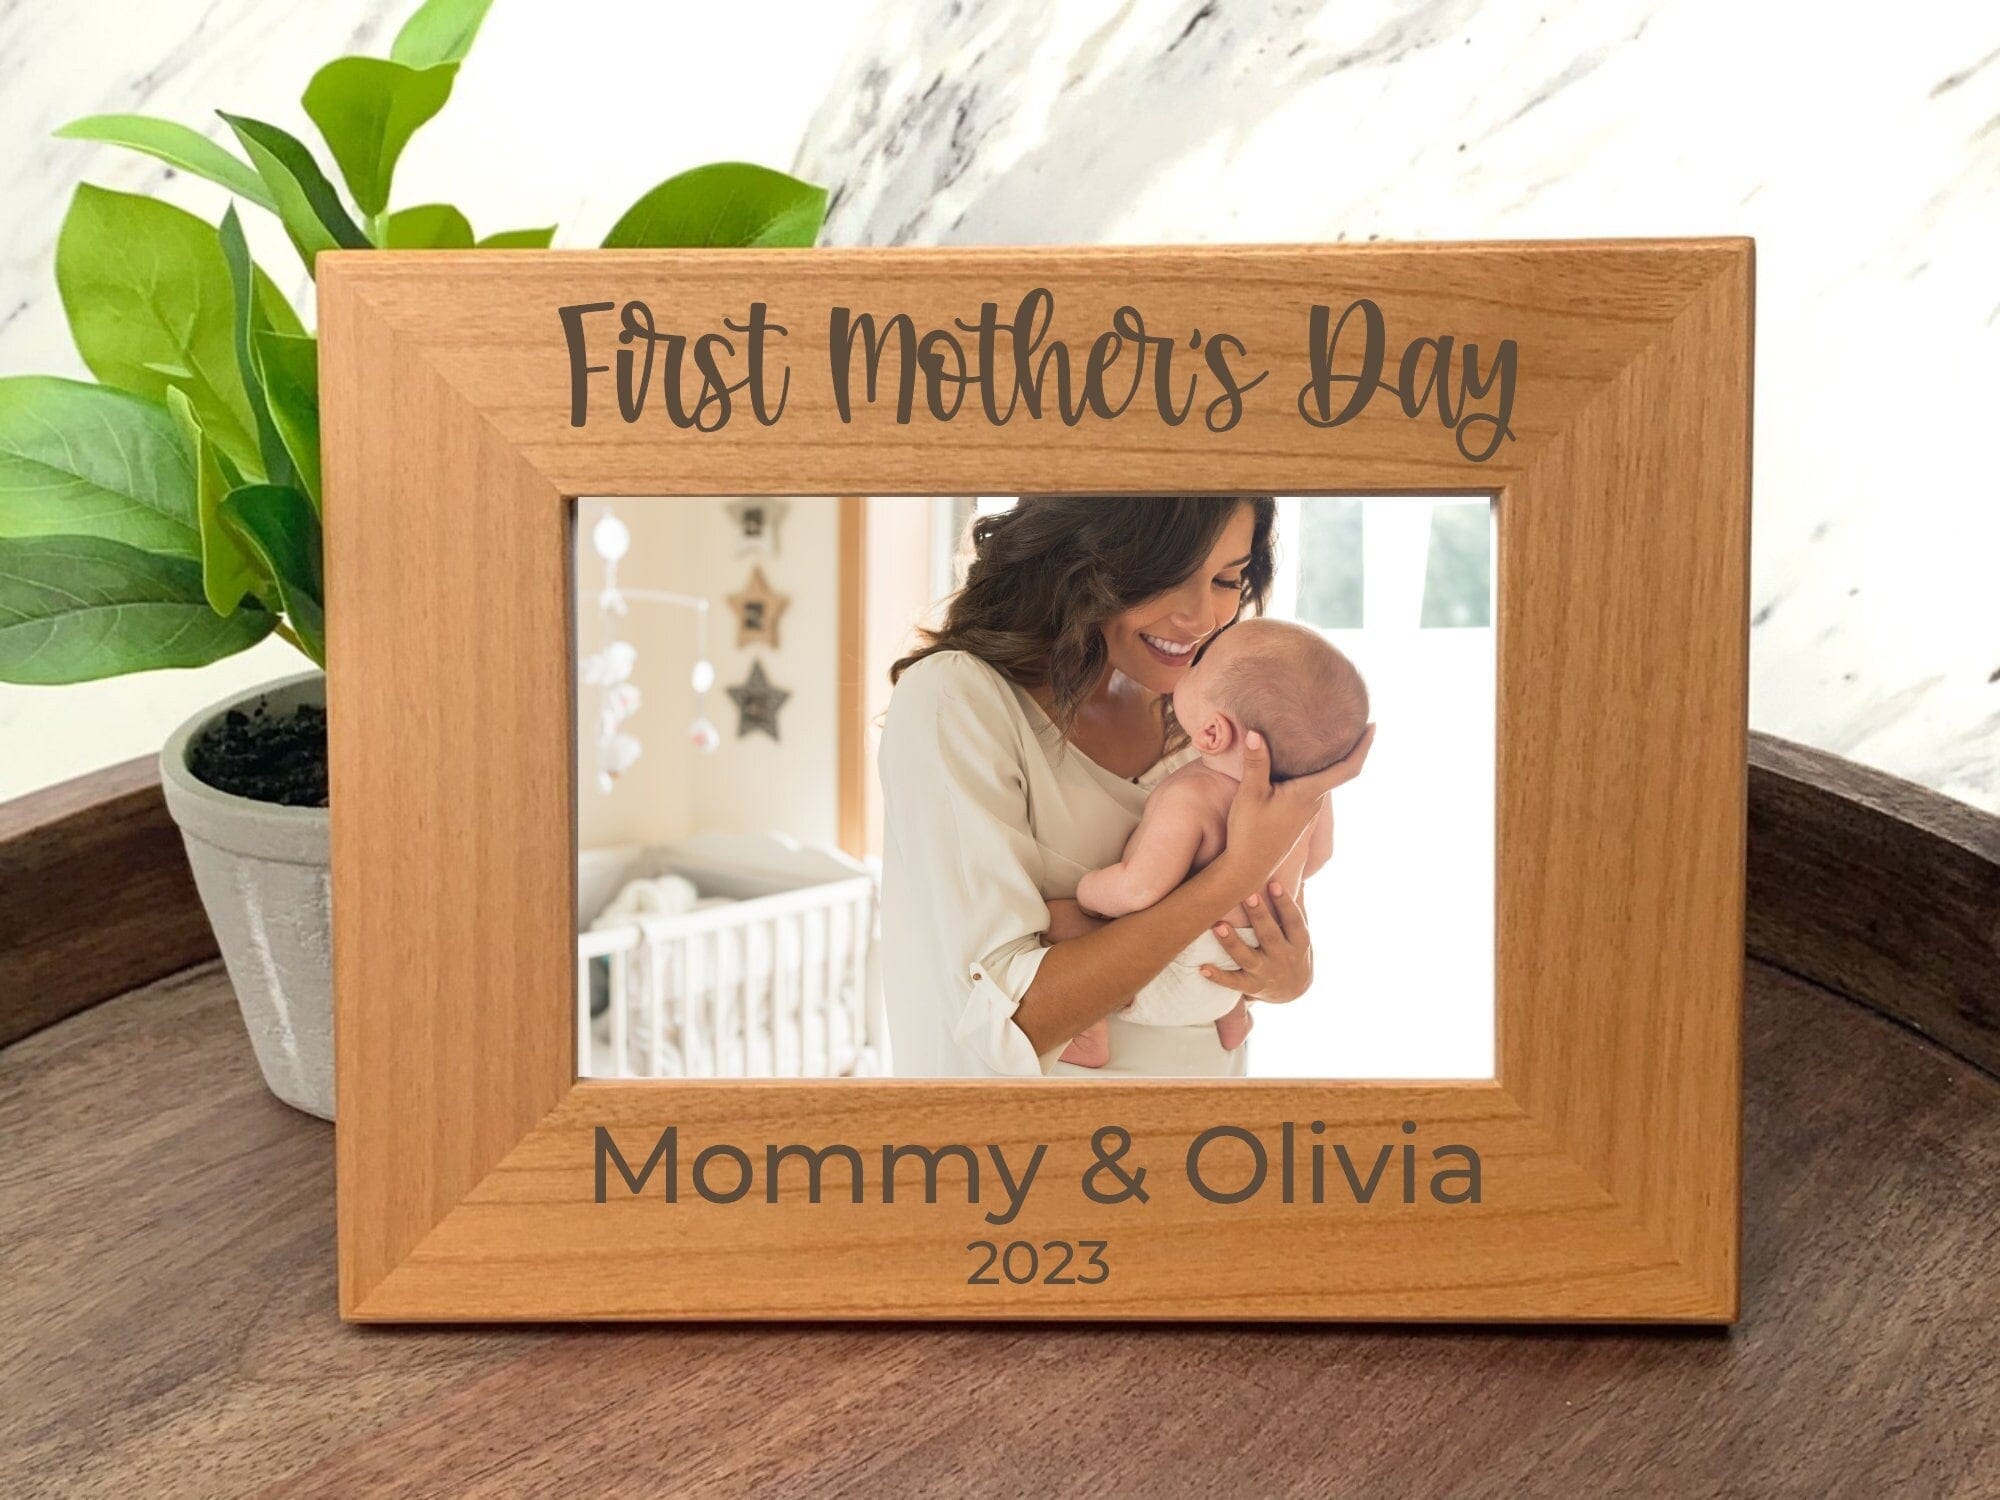 Run Wild Engraving PF 2 names and year First Mother's Day Frame Personalized